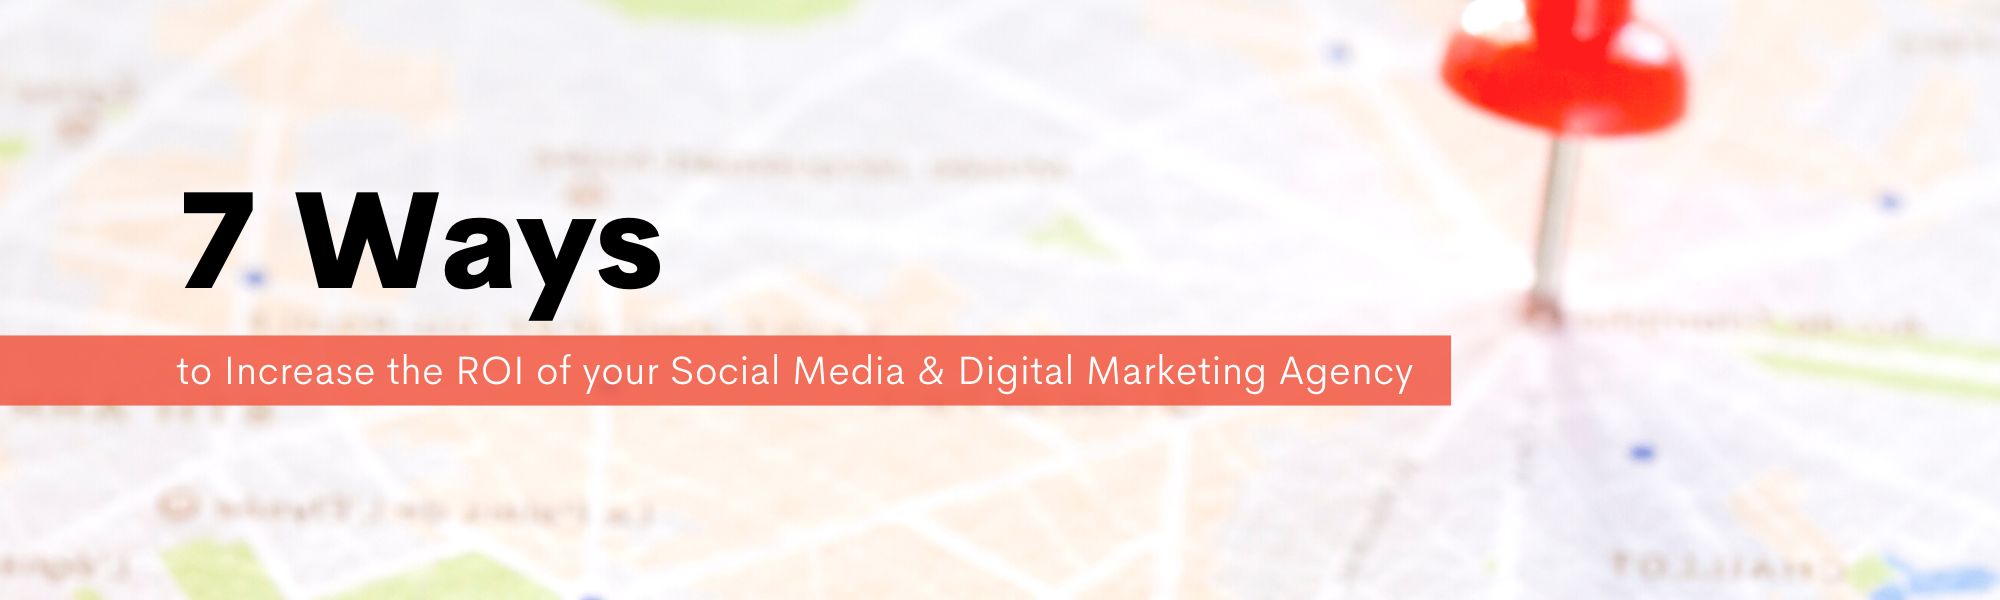 7 Ways to Increase the ROI of your Social Media & Digital Marketing Agency